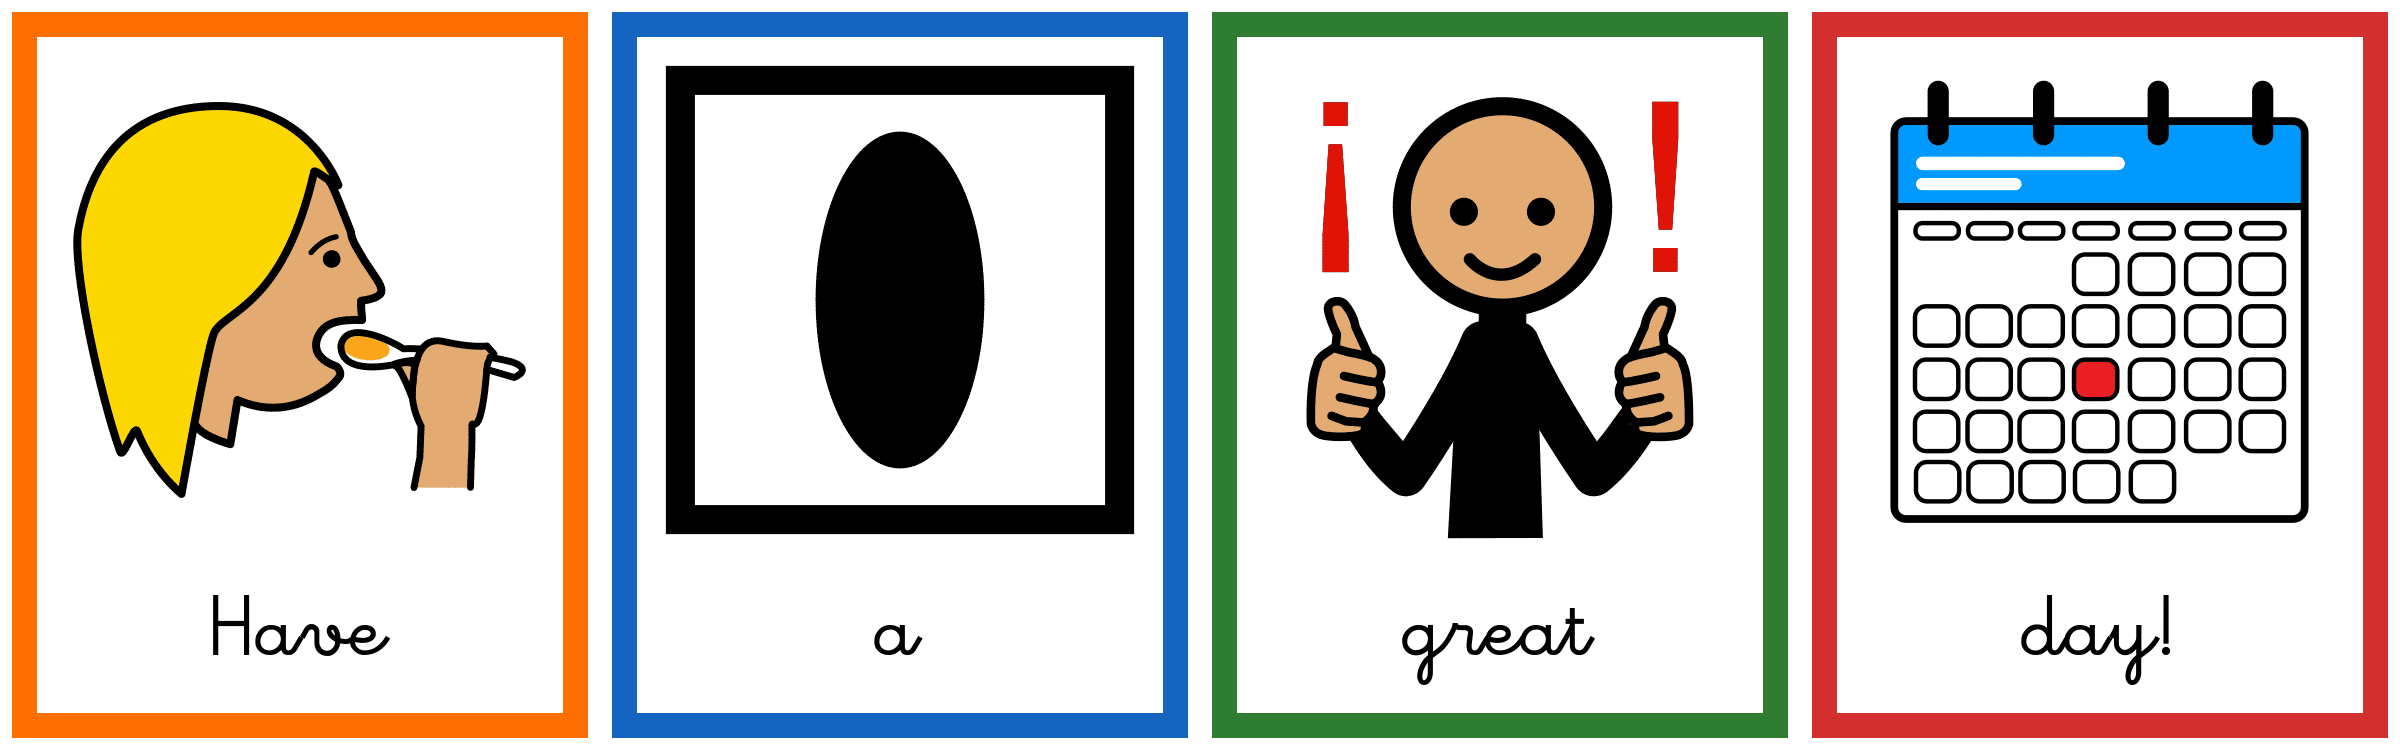 Sequence of pictograms generated by PictoMaker's Webex Bot and PictoMaker Lite. It reads "Have a great day!"